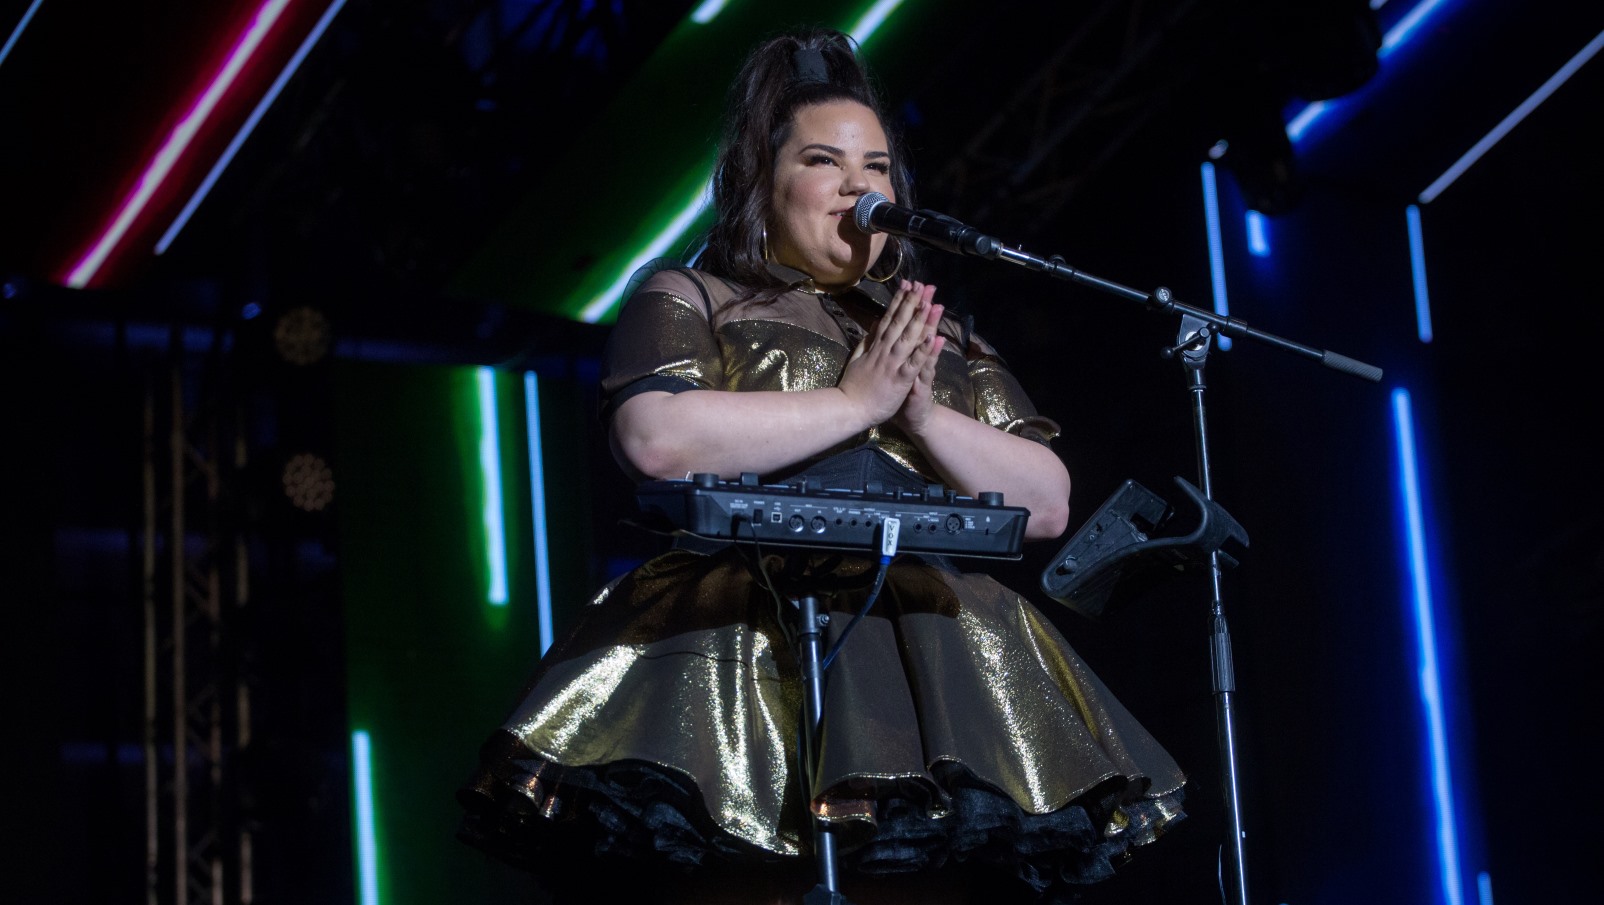 Netta Barzilai, the Israeli contestant in the Eurovision 2018 song contest, performs at the Israel Calling concert in Tel Aviv, April 10, 2018. Photo by Miriam Alster/FLASH90